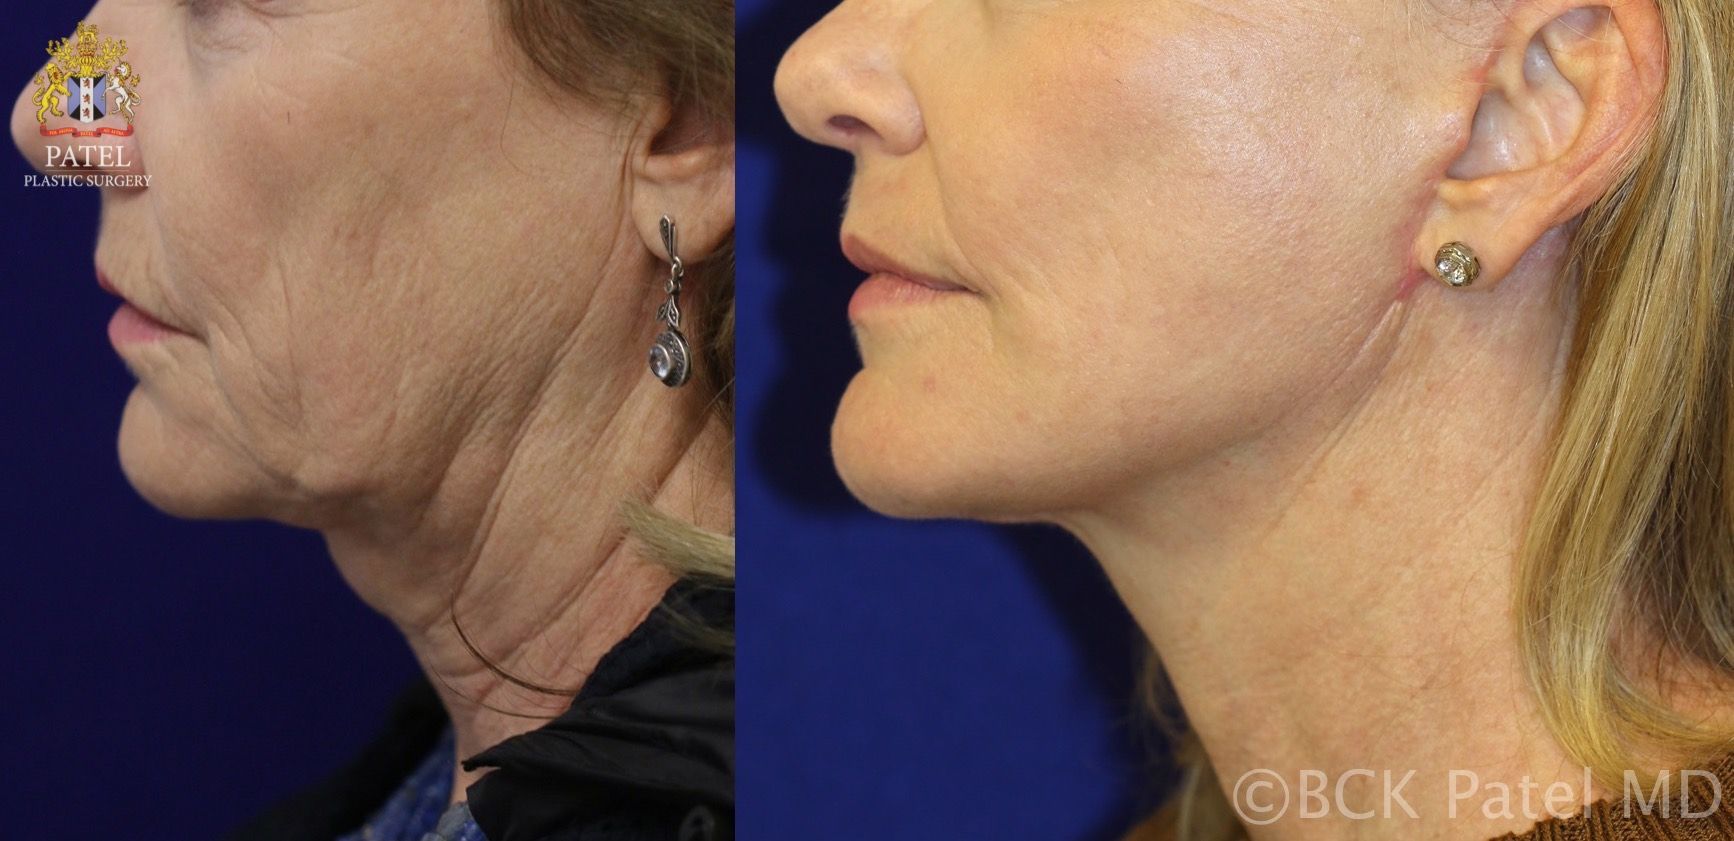 englishsurgeon.com. Photos show lower facelift and necklift with rotation of the "witch's chin" BCK Patel MD; Salt Lake City, Utah, St. George